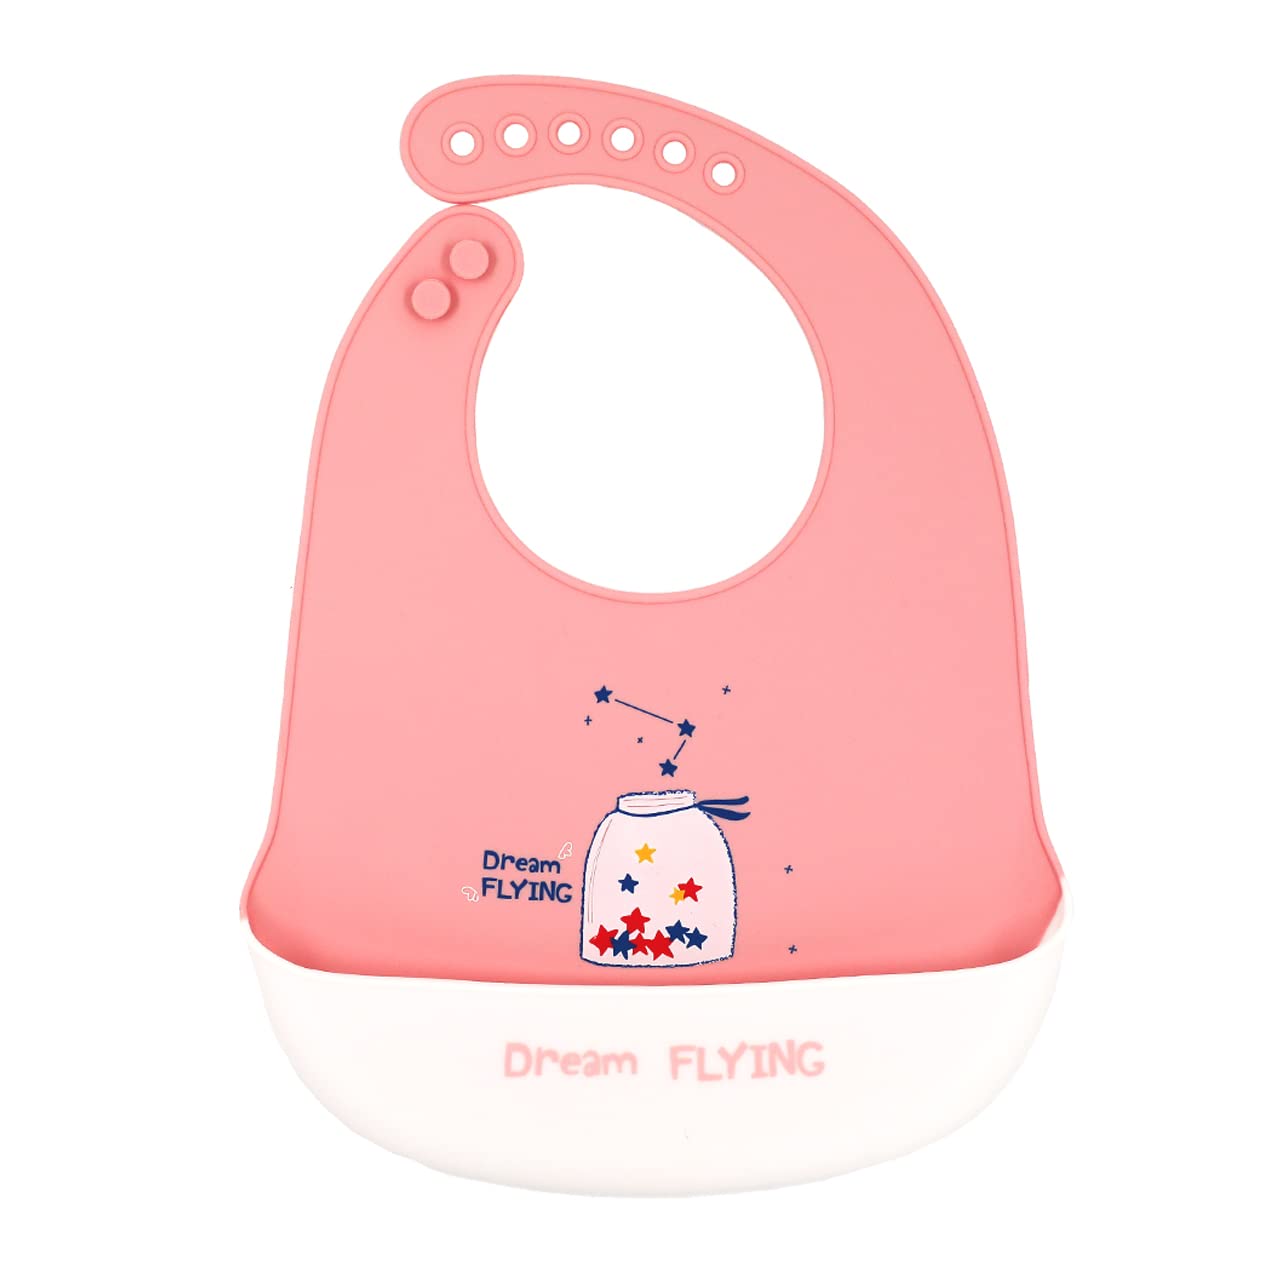 Silicone Bibs Contrast Color Collection| Waterproof Silicone Baby Bibs for Baby Feeding | Adjustable Fit Silicone Bibs